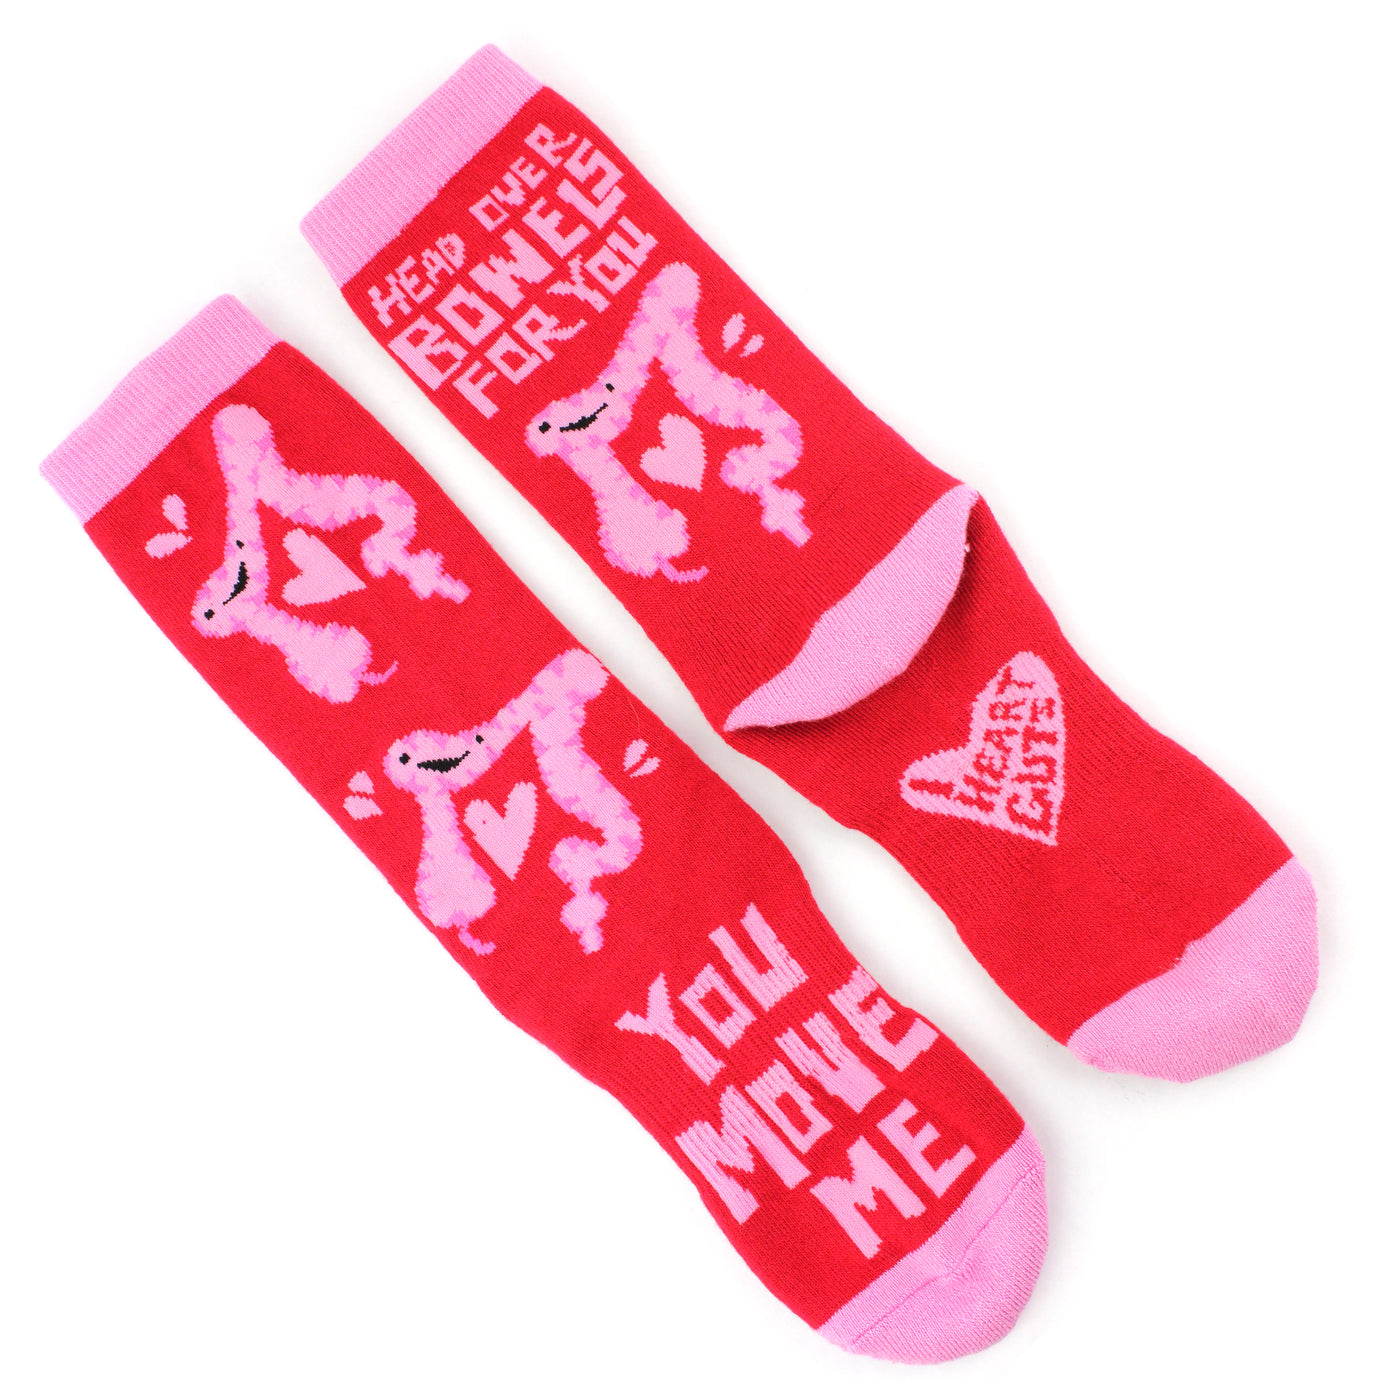 Colon Socks - You Move Me + Head Over Bowels for You - I Heart Guts